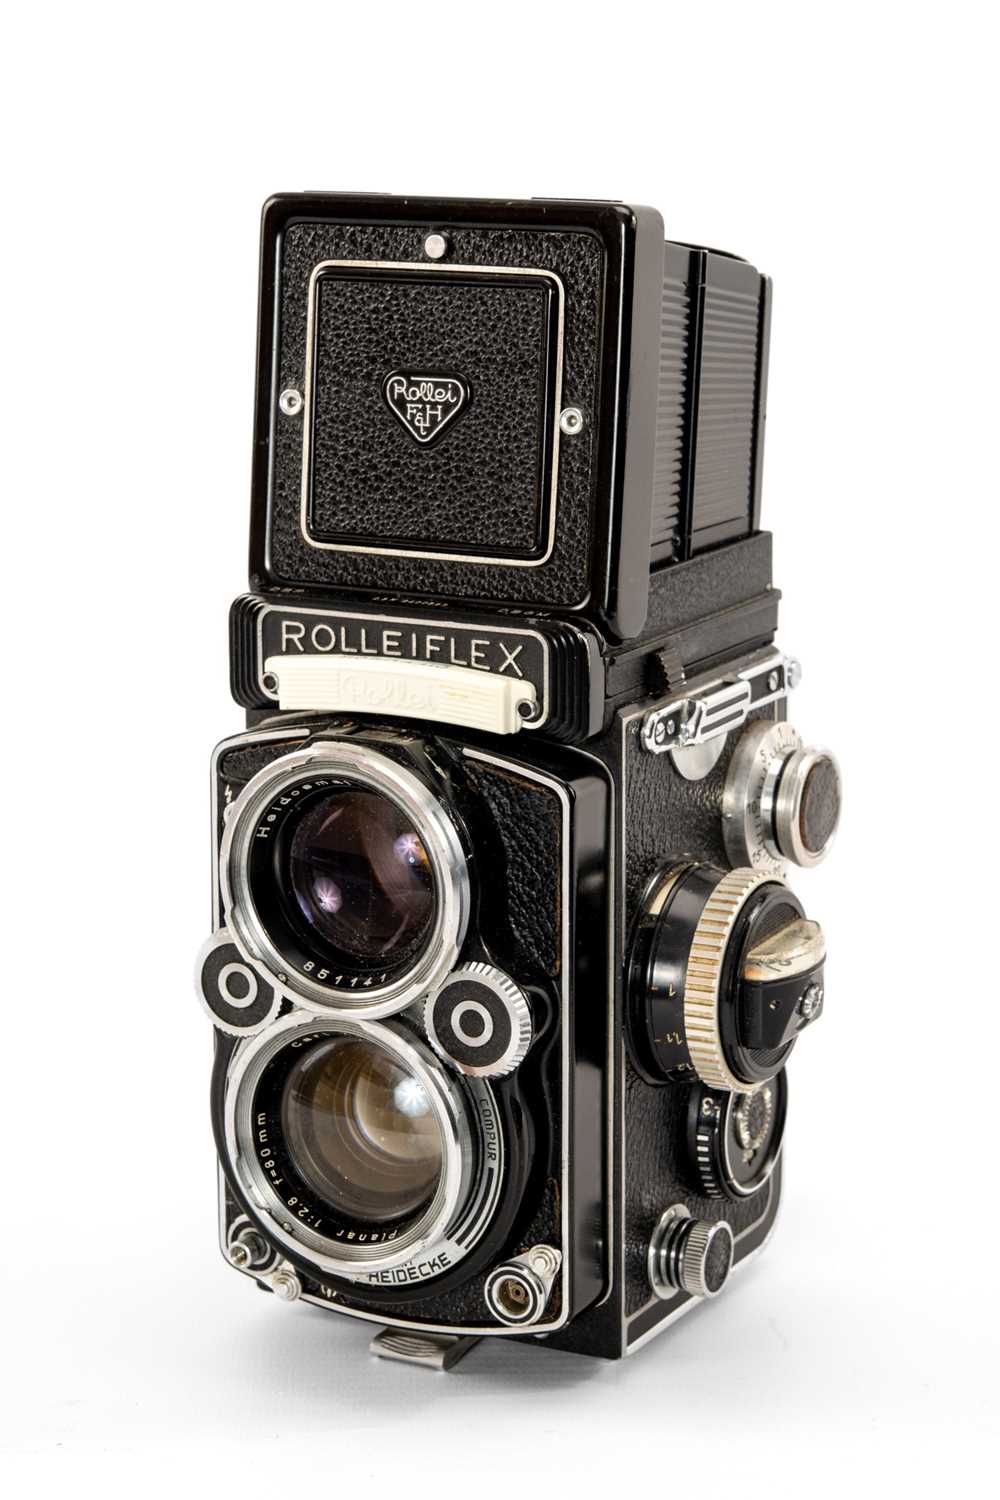 A ROLEI F&H ROLLEIFLEX 2.8F MEDIUM FORMAT CAMERA - black, serial no. 2400583, with a Carl Zeiss, - Image 2 of 2